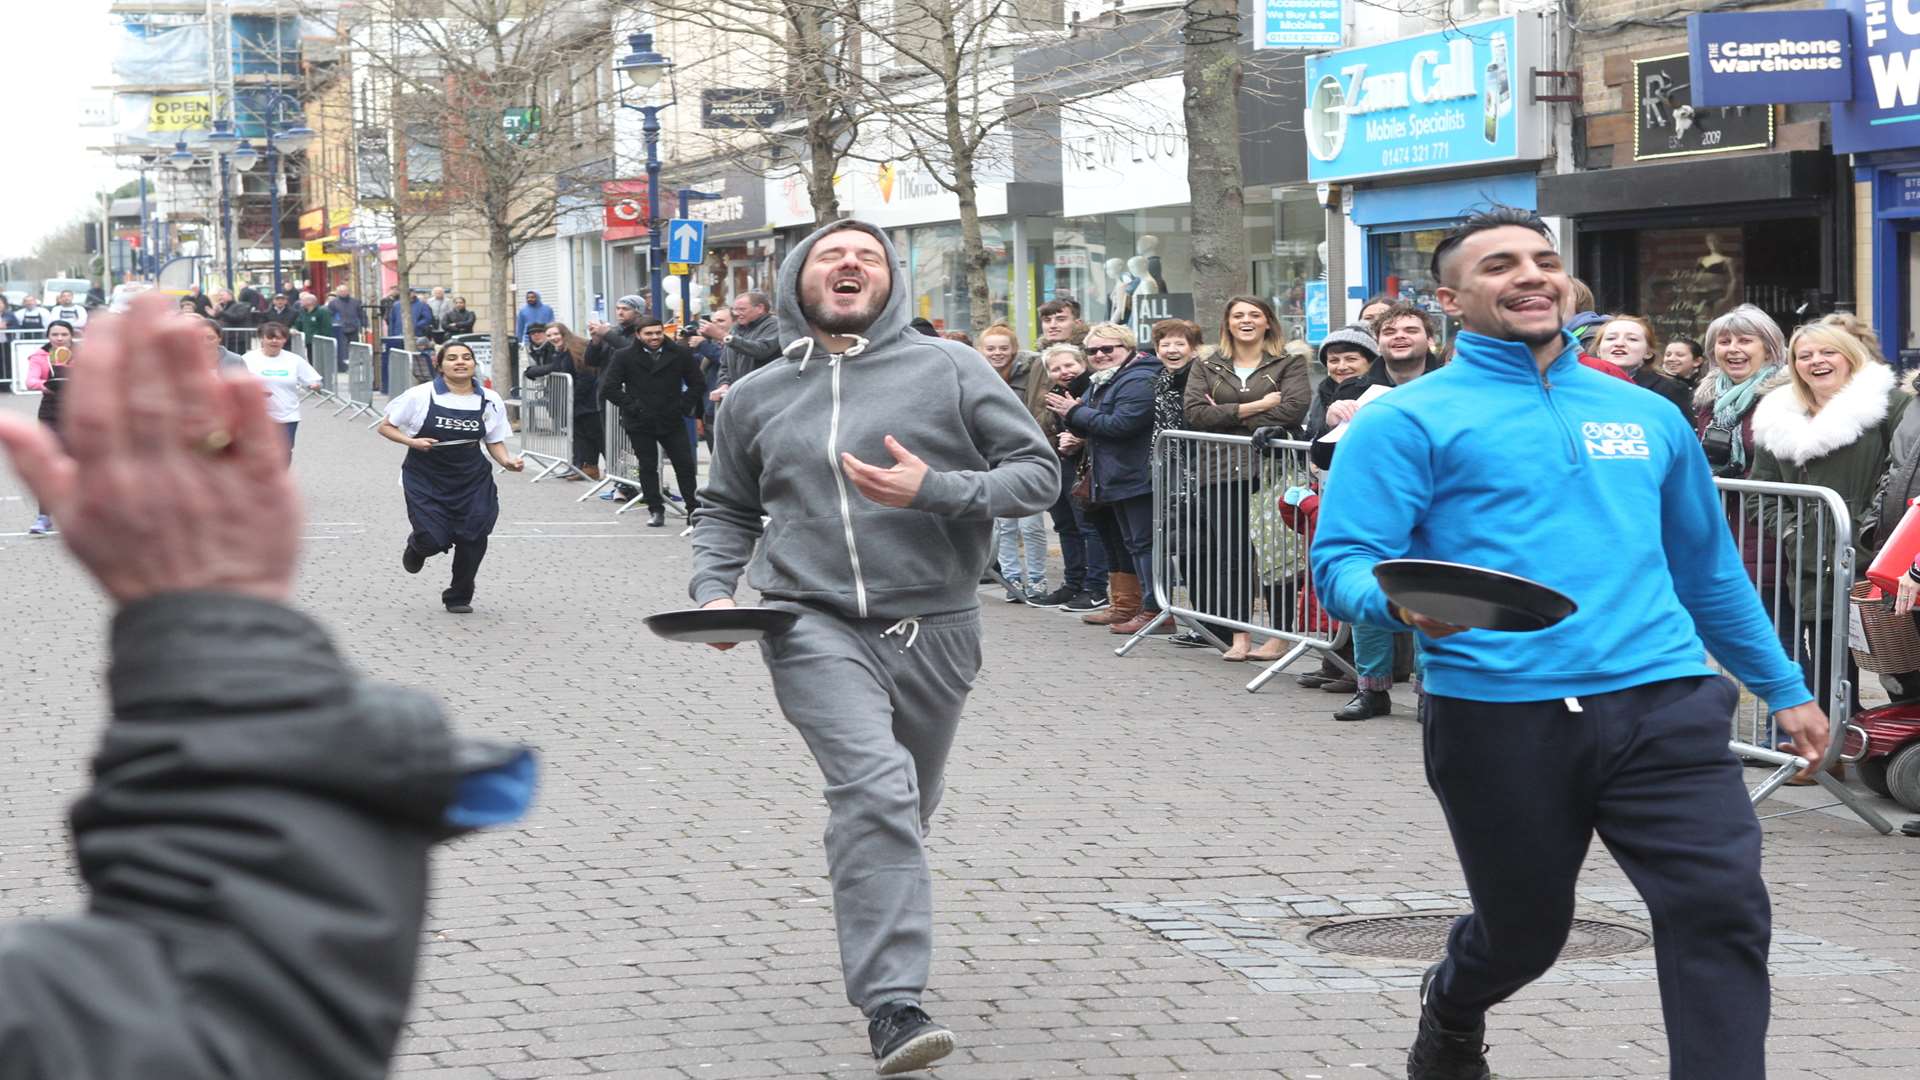 Rajan Dhaliwal, from NRG came first and Gary Lane from Kulakuts second at a pancake race in Gravesend Town Centre during the heats.